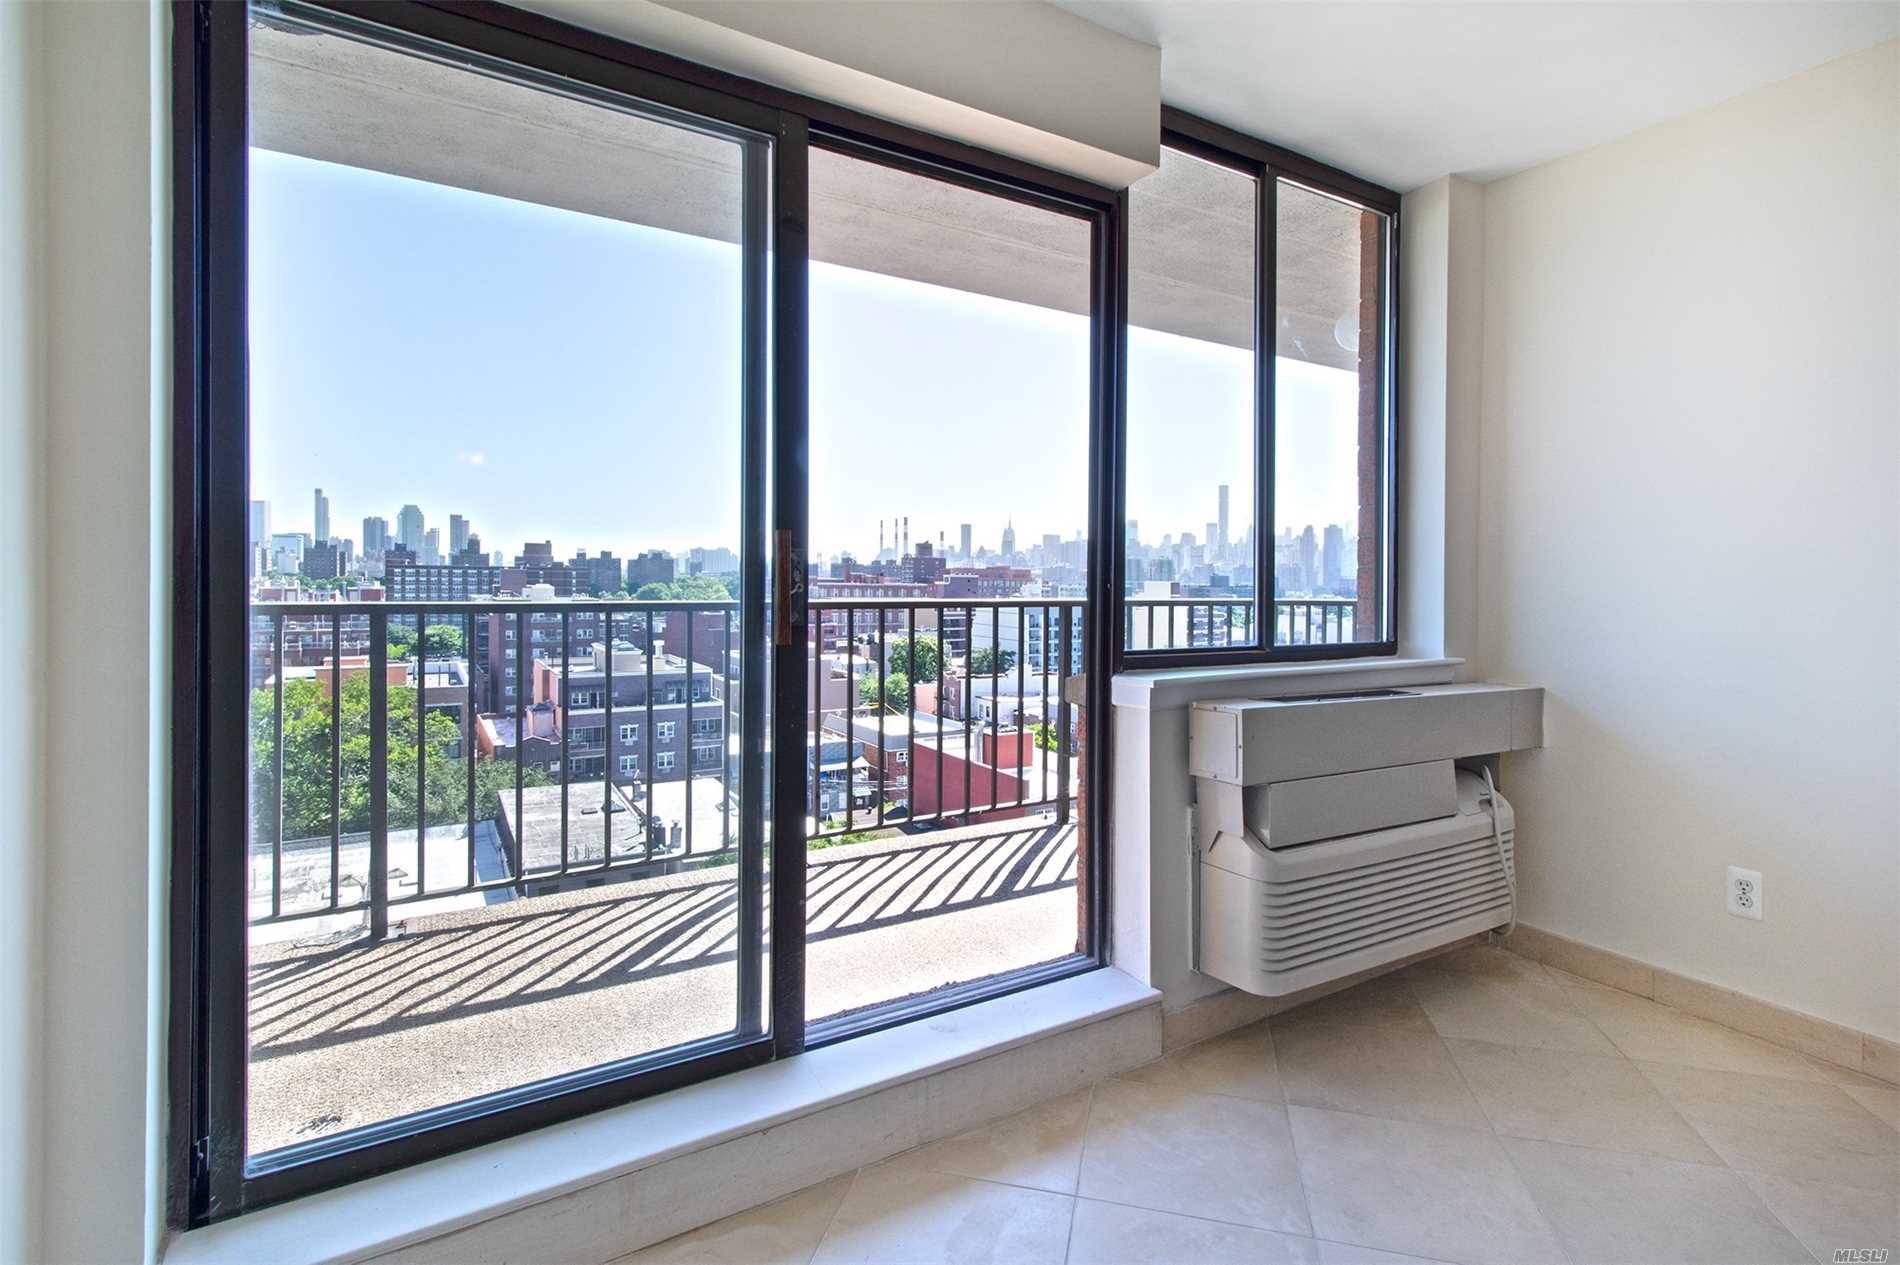 Renovated And Sun Drenched 1Bed/1Bath Condo For Sale At An Amazing Location Only 2 Blocks From The N/W Subway And 1 Block From Mount Sinai Hospital.